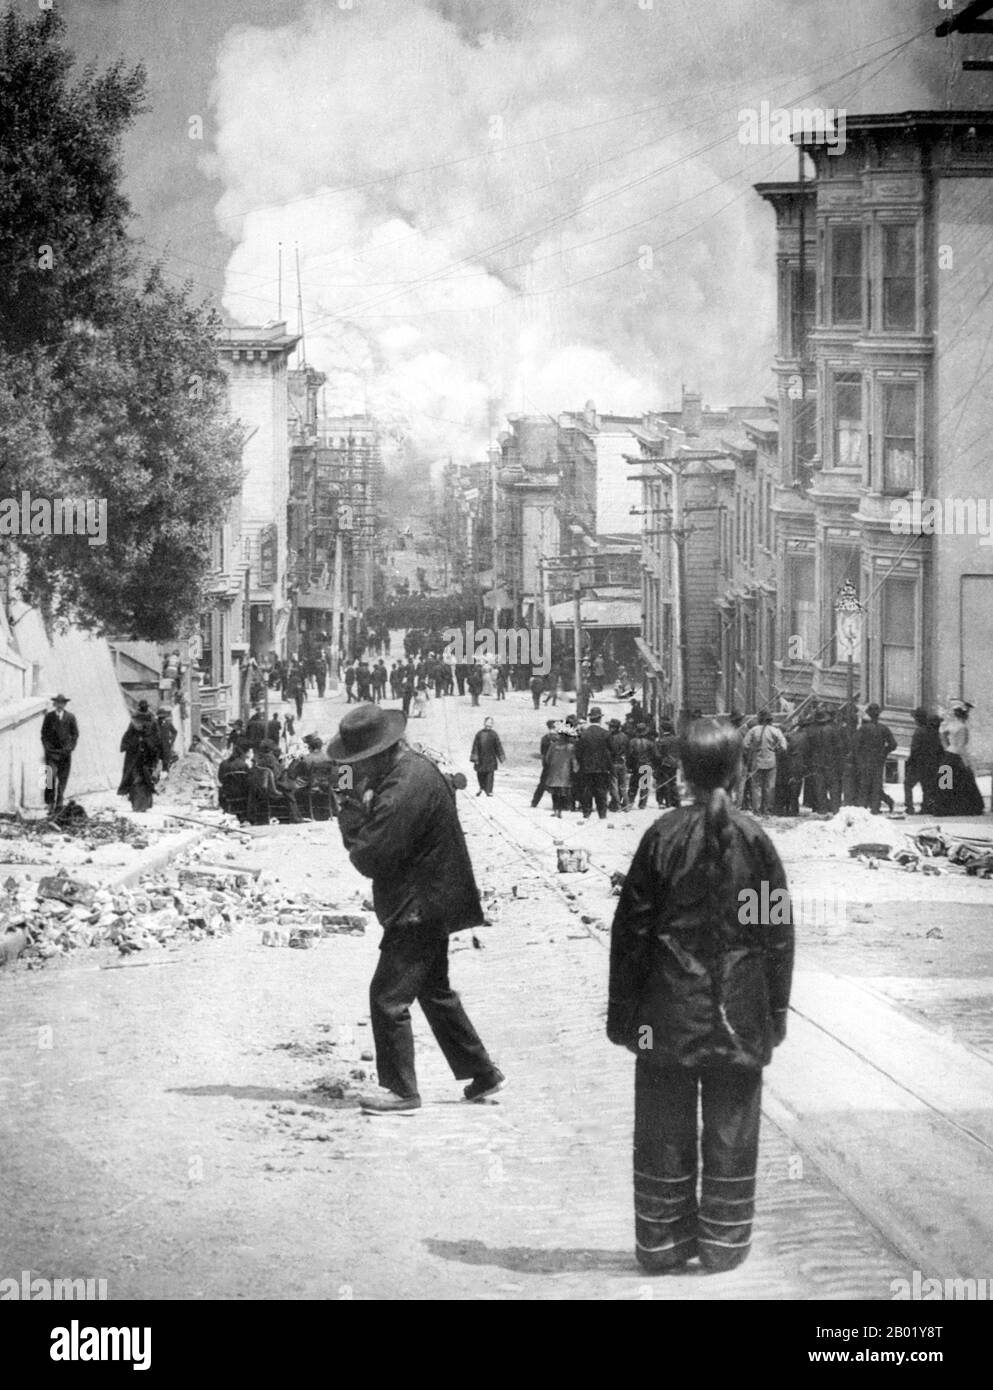 The San Francisco earthquake of 1906 was a major earthquake that struck San Francisco and the coast of Northern California at 5:12 a.m. on Wednesday, April 18, 1906.  The most widely accepted estimate for the magnitude of the earthquake is a moment magnitude (Mw) of 7.9; however, other values have been proposed, from 7.7 to as high as 8.25. The main shock epicenter occurred offshore about 2 miles (3.2 km) from the city, near Mussel Rock. It ruptured along the San Andreas Fault both northward and southward for a total of 296 miles (476 km). Shaking was felt from Oregon to Los Angeles, and inlan Stock Photo